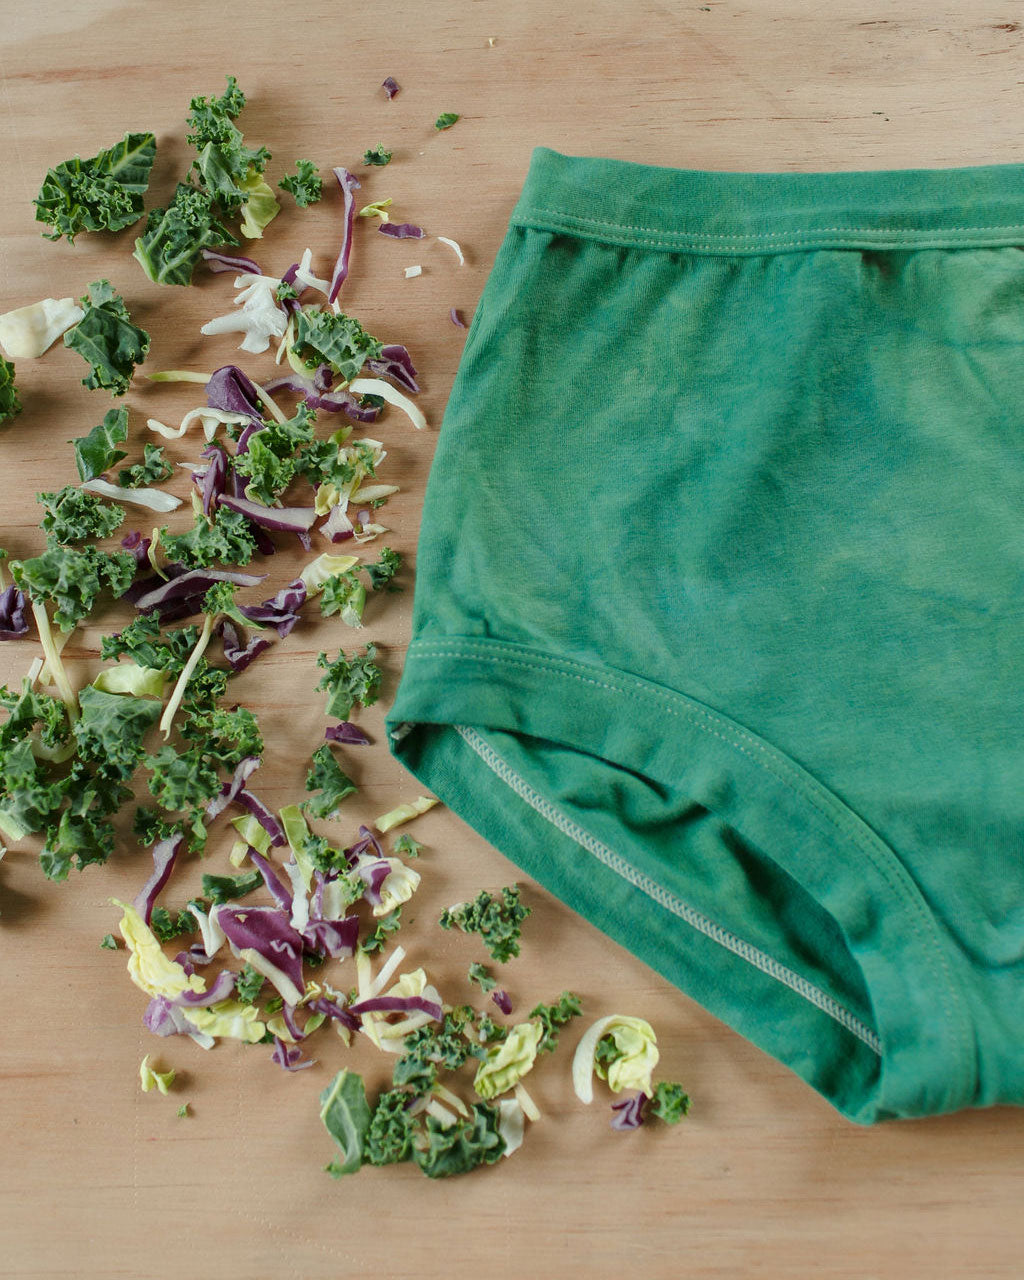 Flat lay of Thunderpants organic cotton Original style underwear in hand dyed Emerald color with kale around.